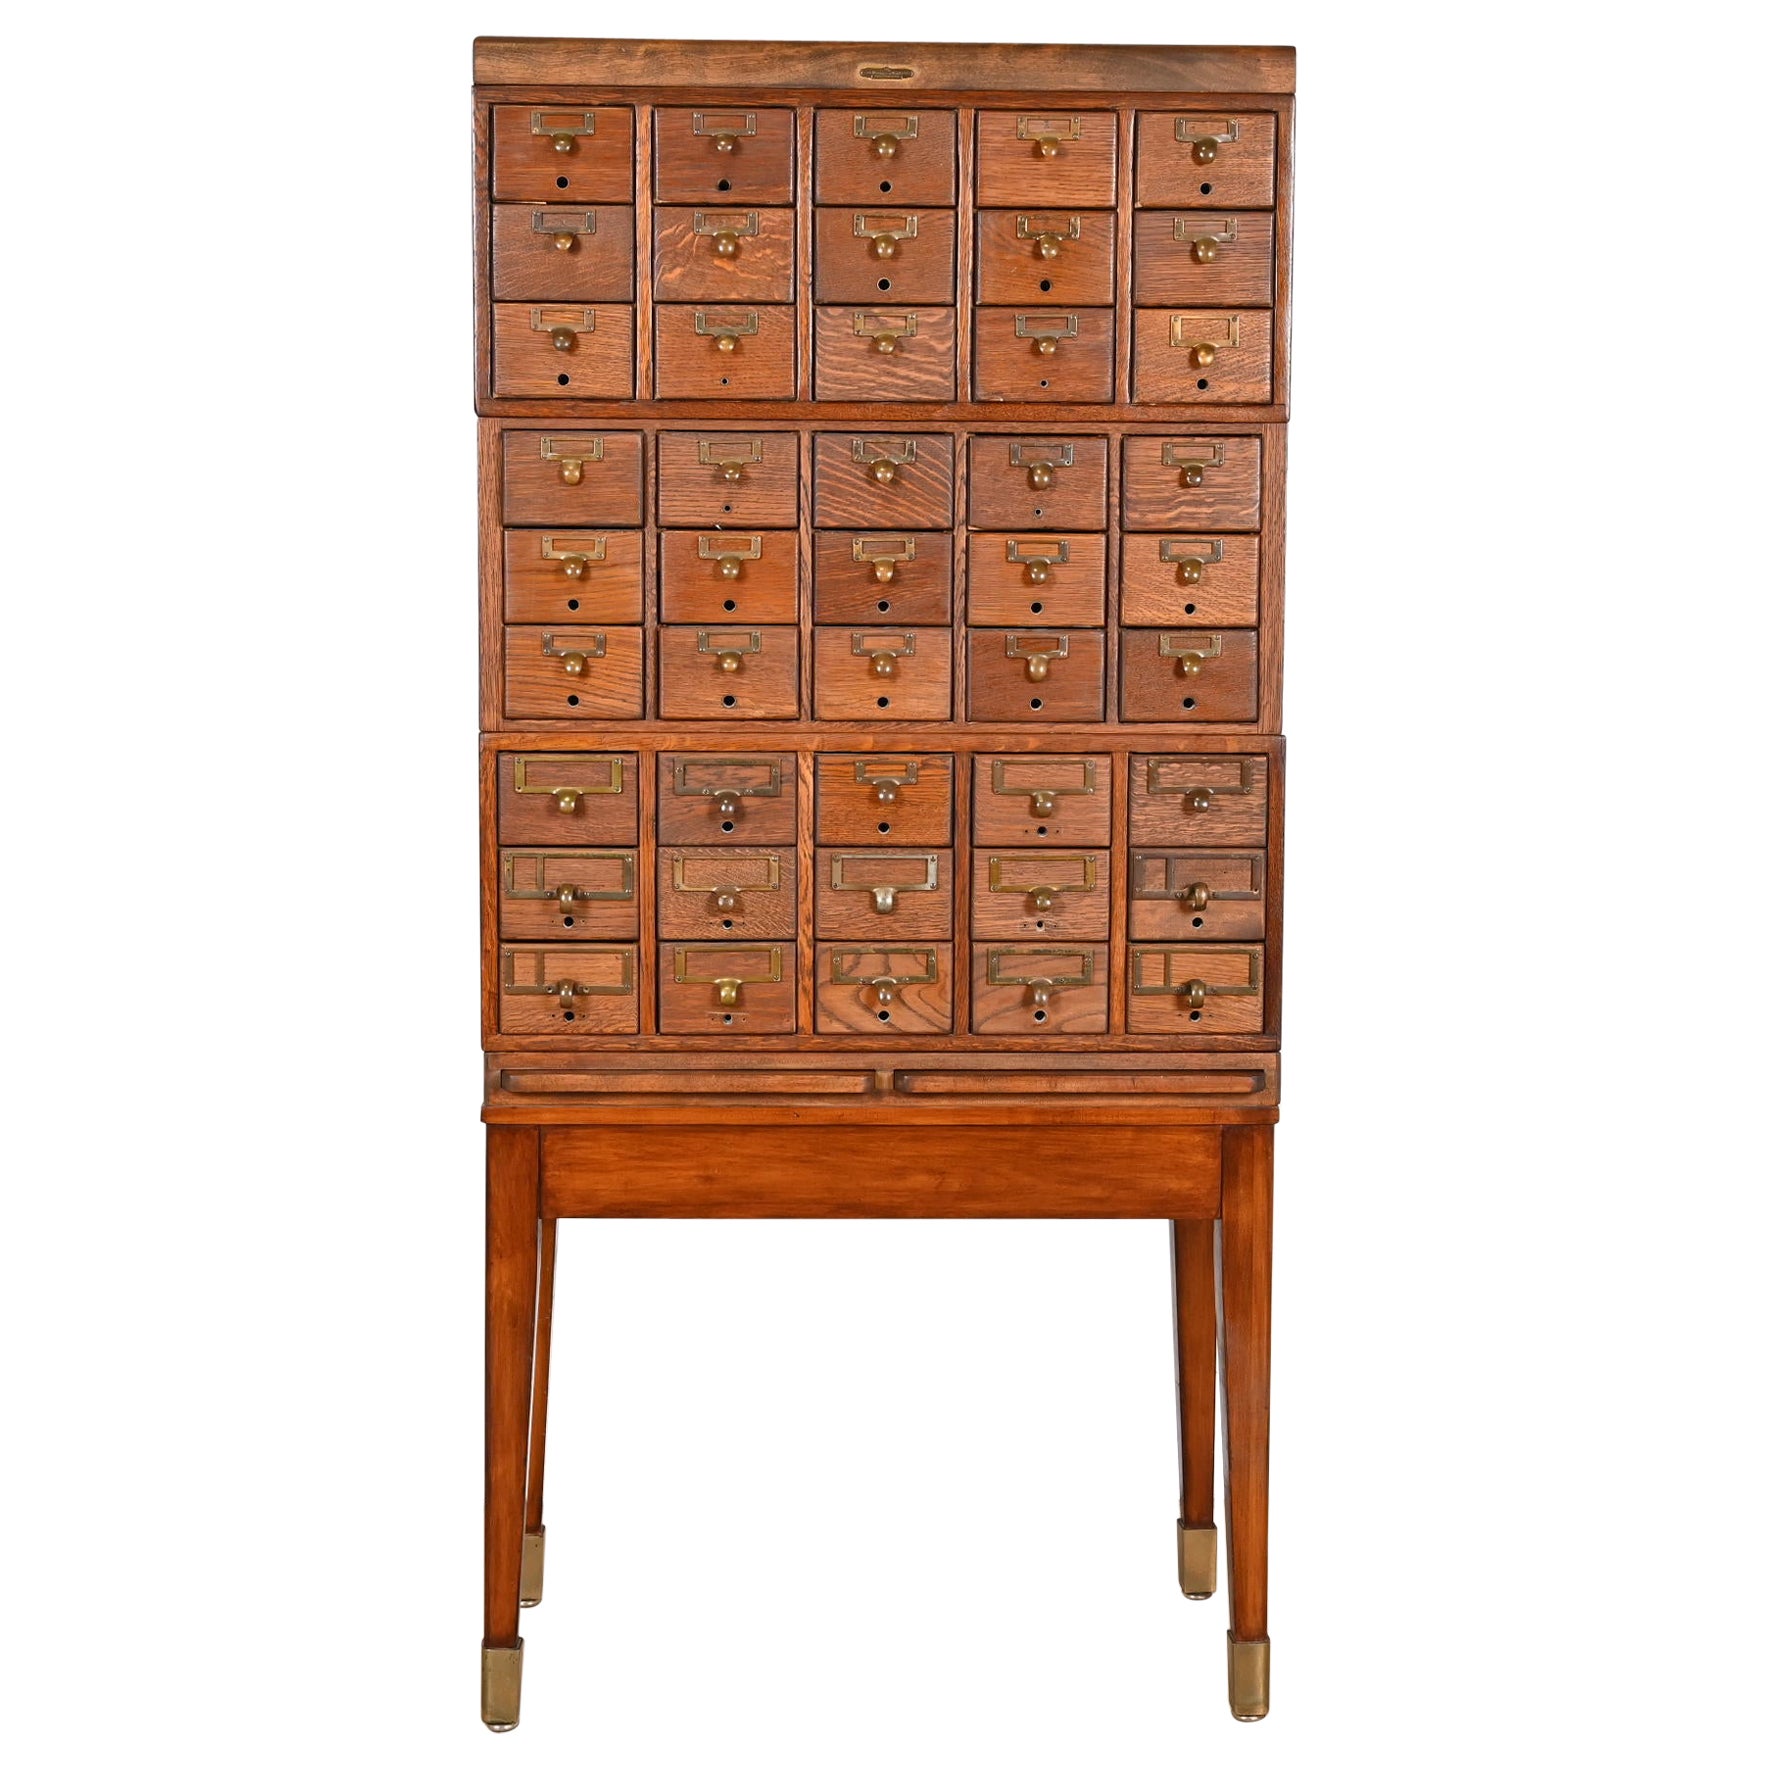 Antique Arts & Crafts 45-Drawer Card Catalog Filing Cabinet by Remington Rand